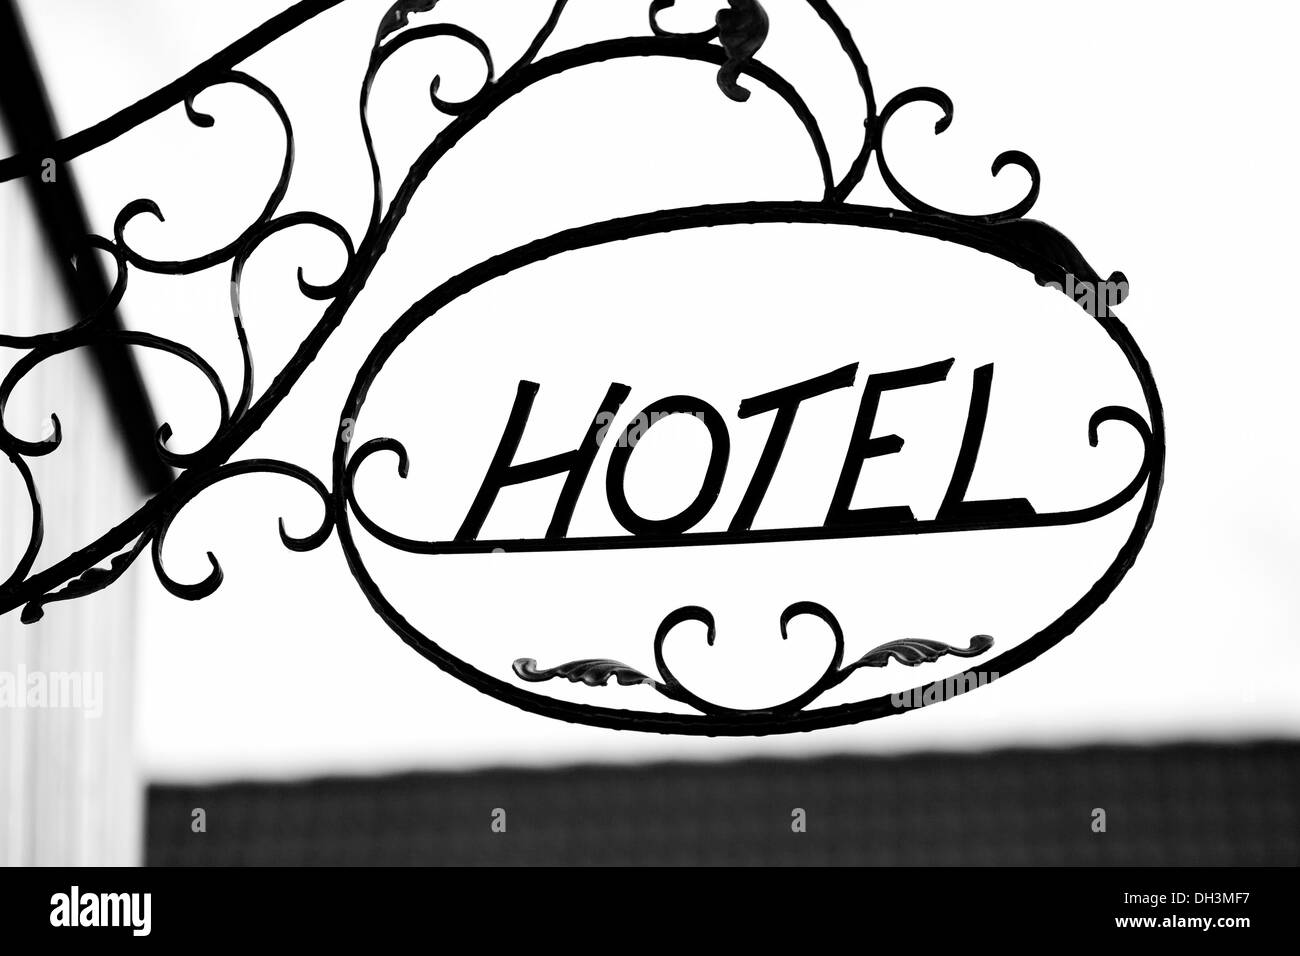 Cast-iron sign with the word Hotel Stock Photo